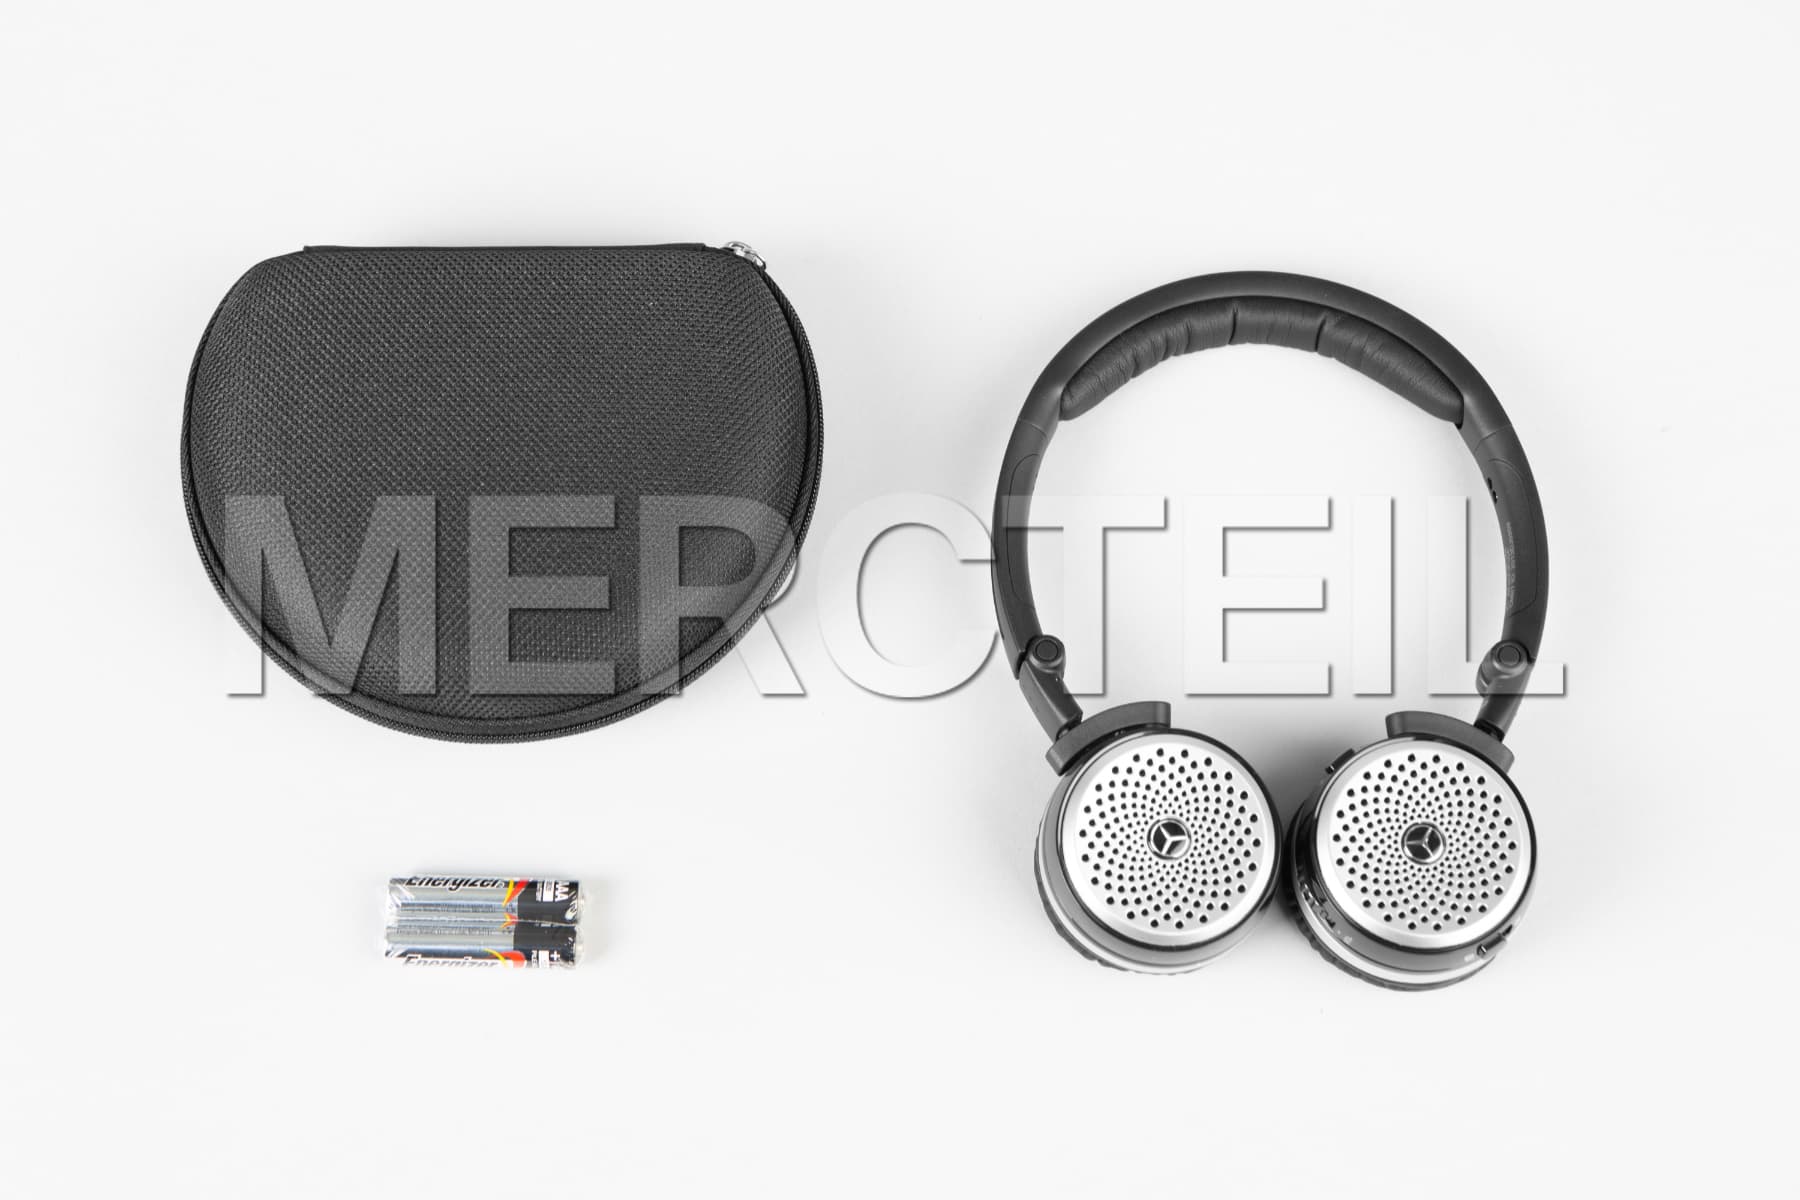 S Class Headphones for Rear Seat Entertainment System Genuine Mercedes Benz (part number: A2228205001)